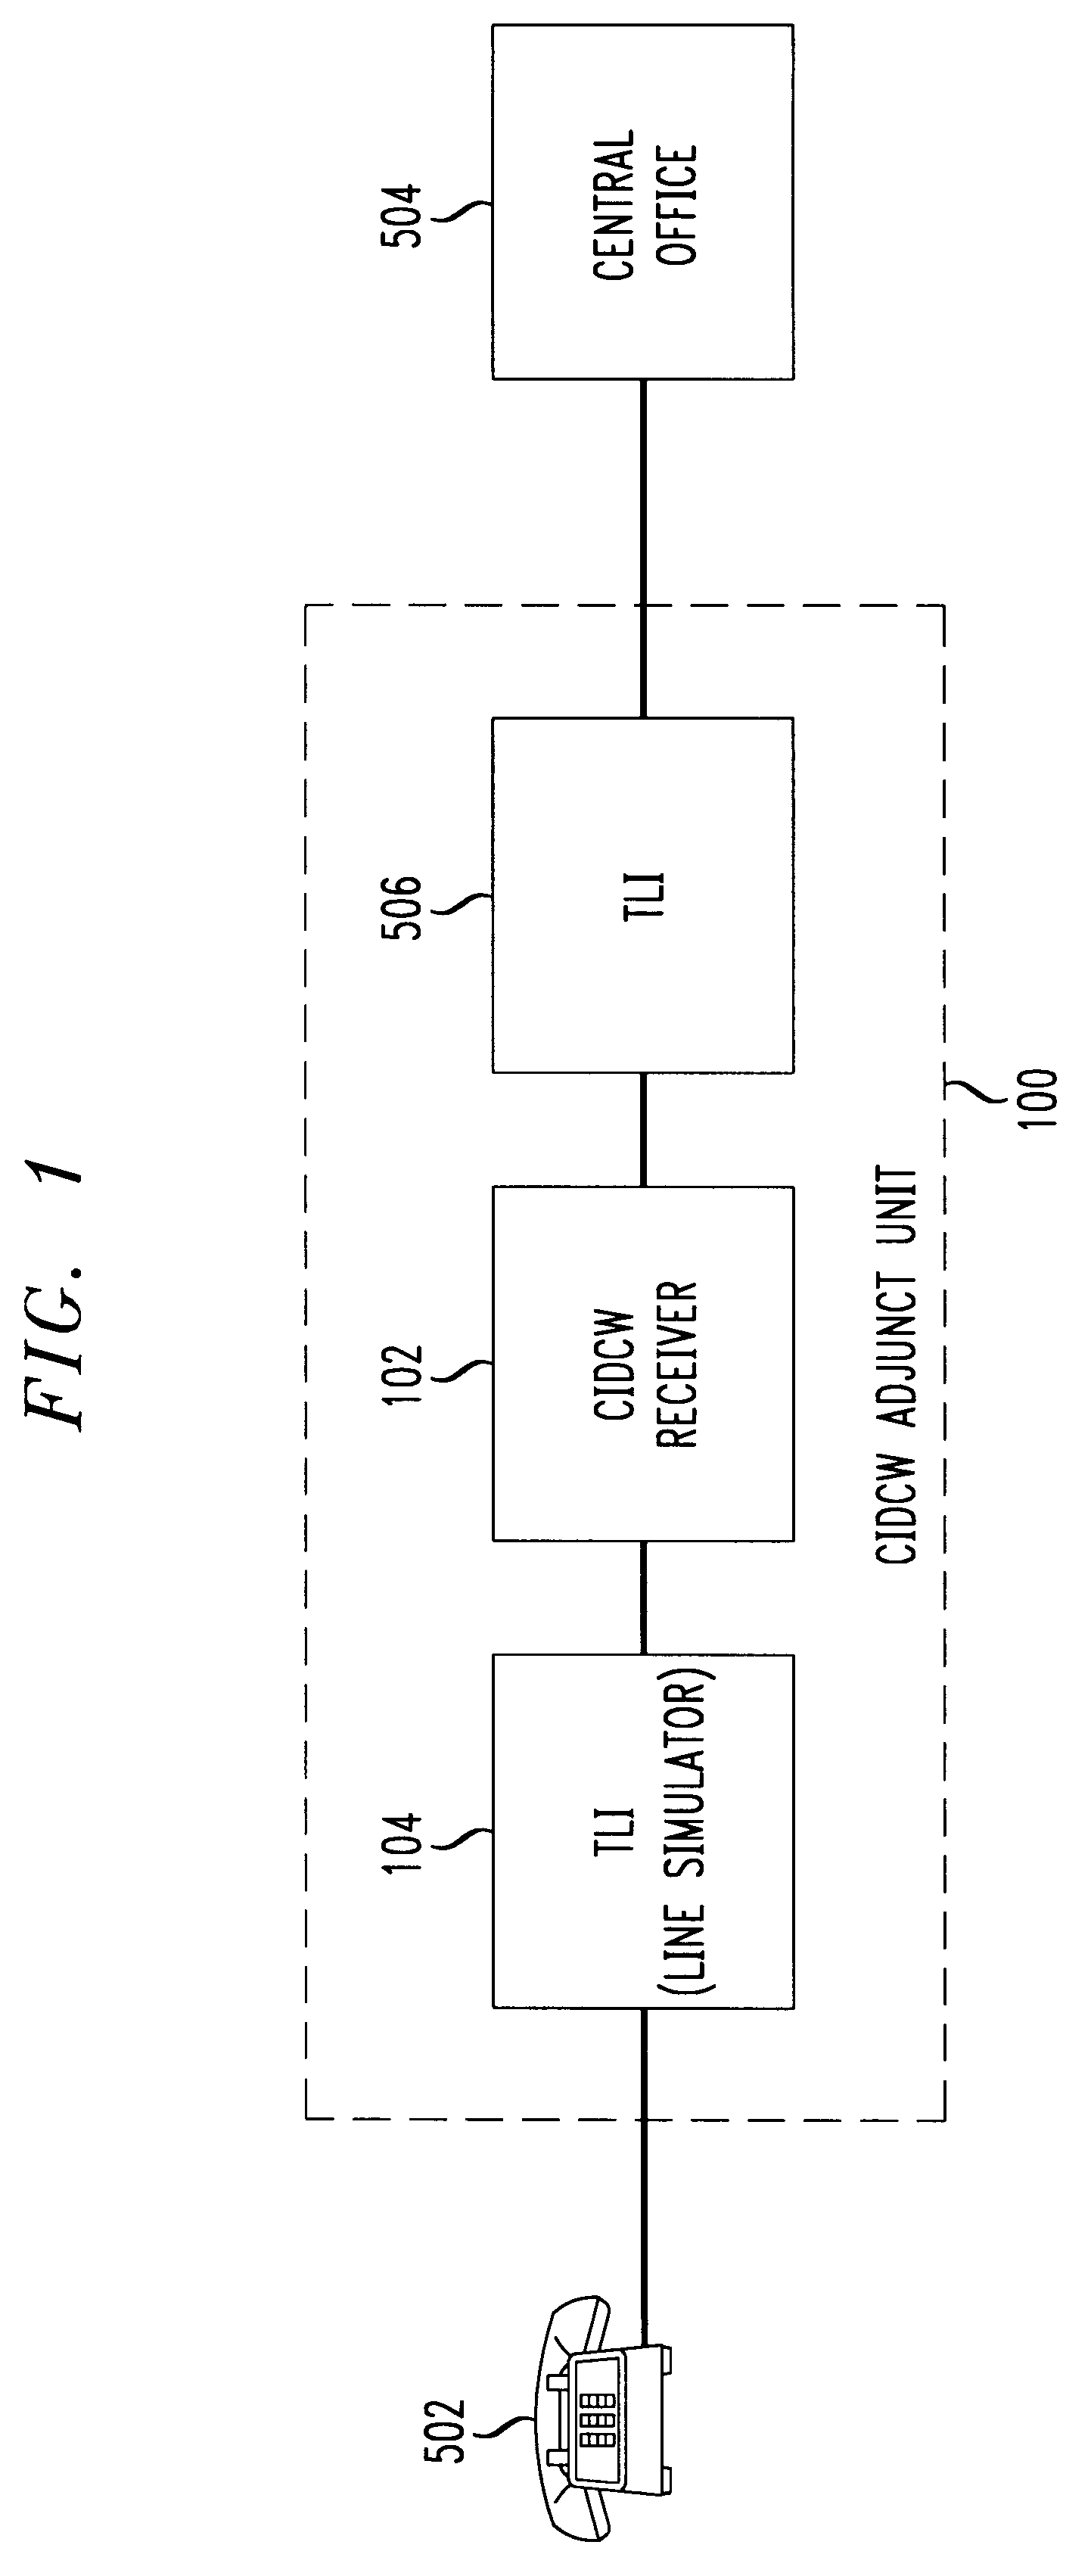 Call related information receiver unit